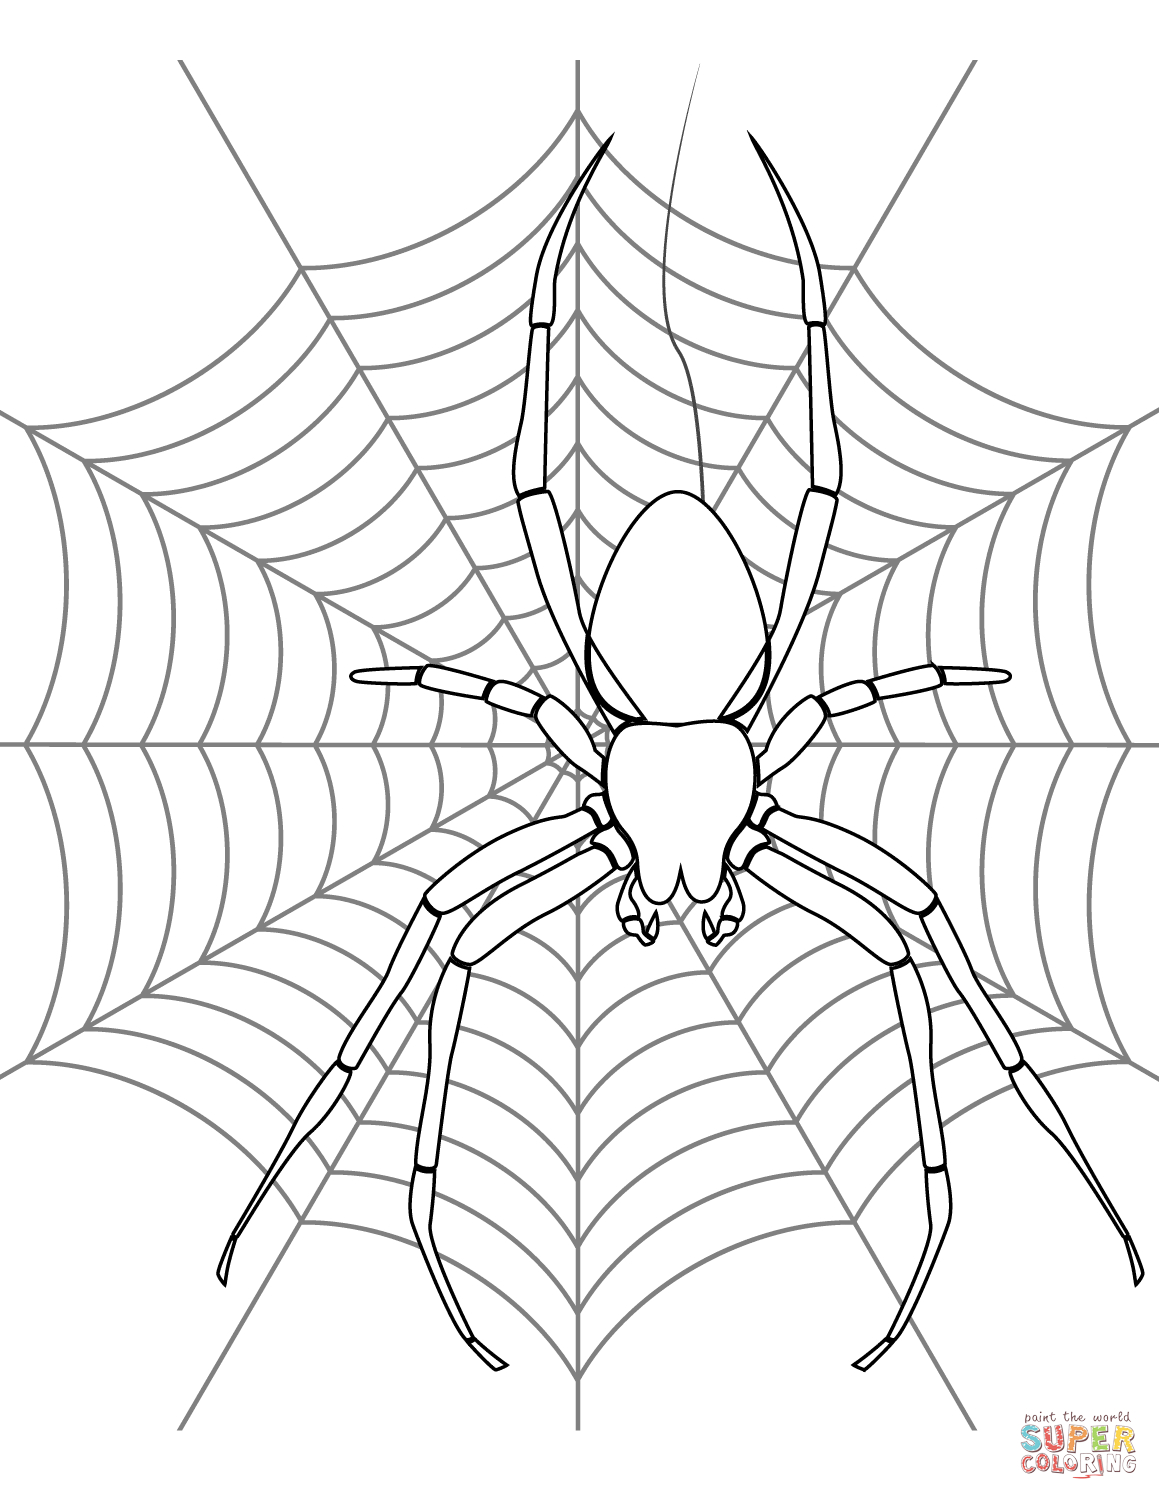 Spider On Its Web Coloring Page | Free Printable Coloring Pages - Free Printable Spider Web